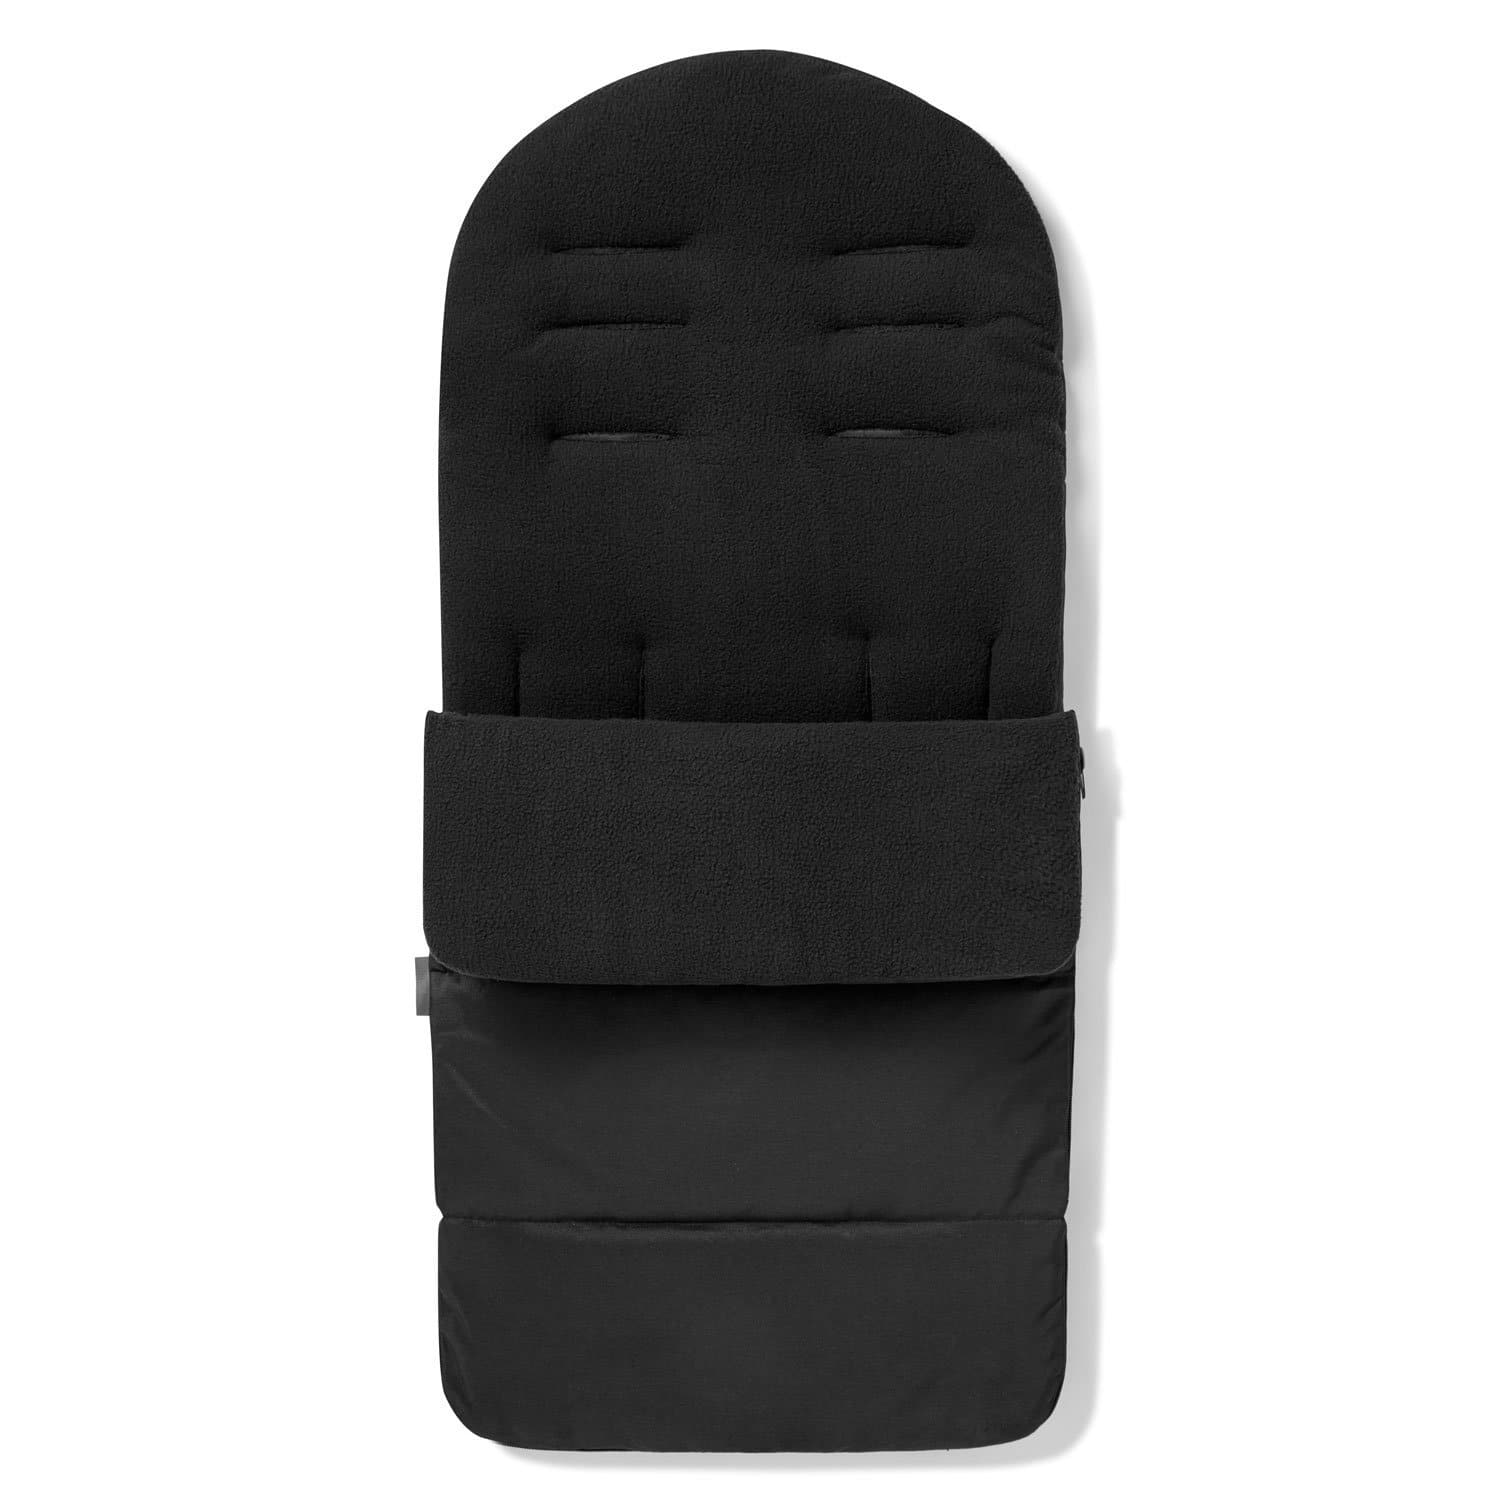 Premium Footmuff / Cosy Toes Compatible with Roma - Black Jack / Fits All Models | For Your Little One